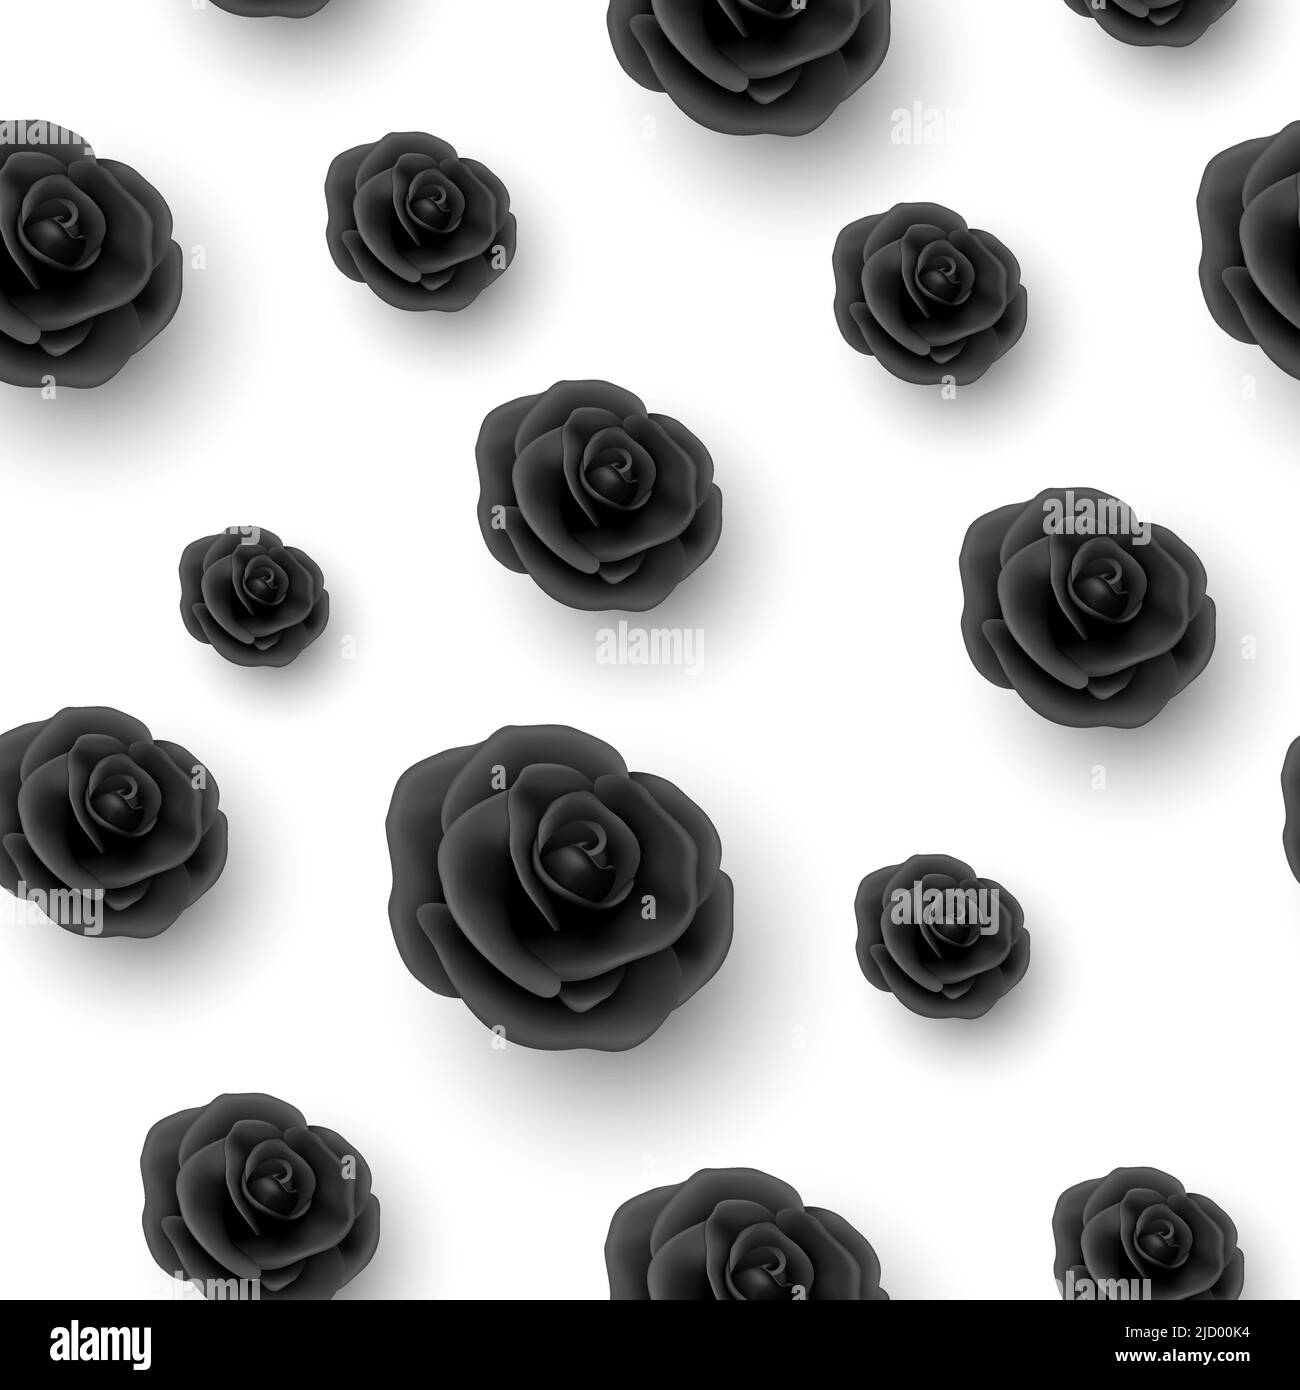 Vector Flower Seamless Pattern, Black Realistic 3d Roses on White. Floral Seamless Background. Wedding Concept. Floral Illustration for Dreeting Card Stock Vector